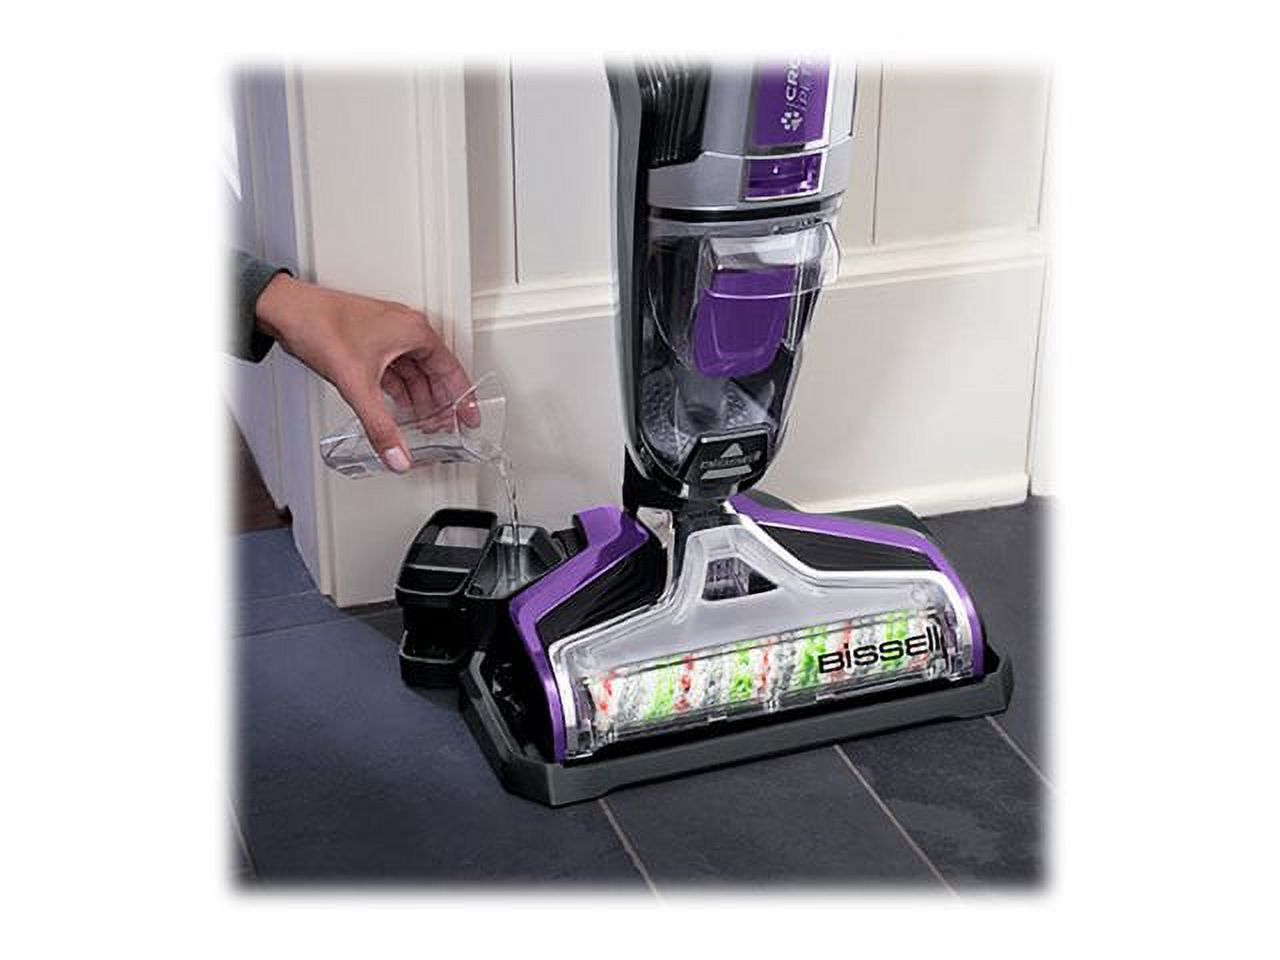 BISSELL Crosswave Pet Pro Wet Dry Vacuum, 2306A - image 3 of 6